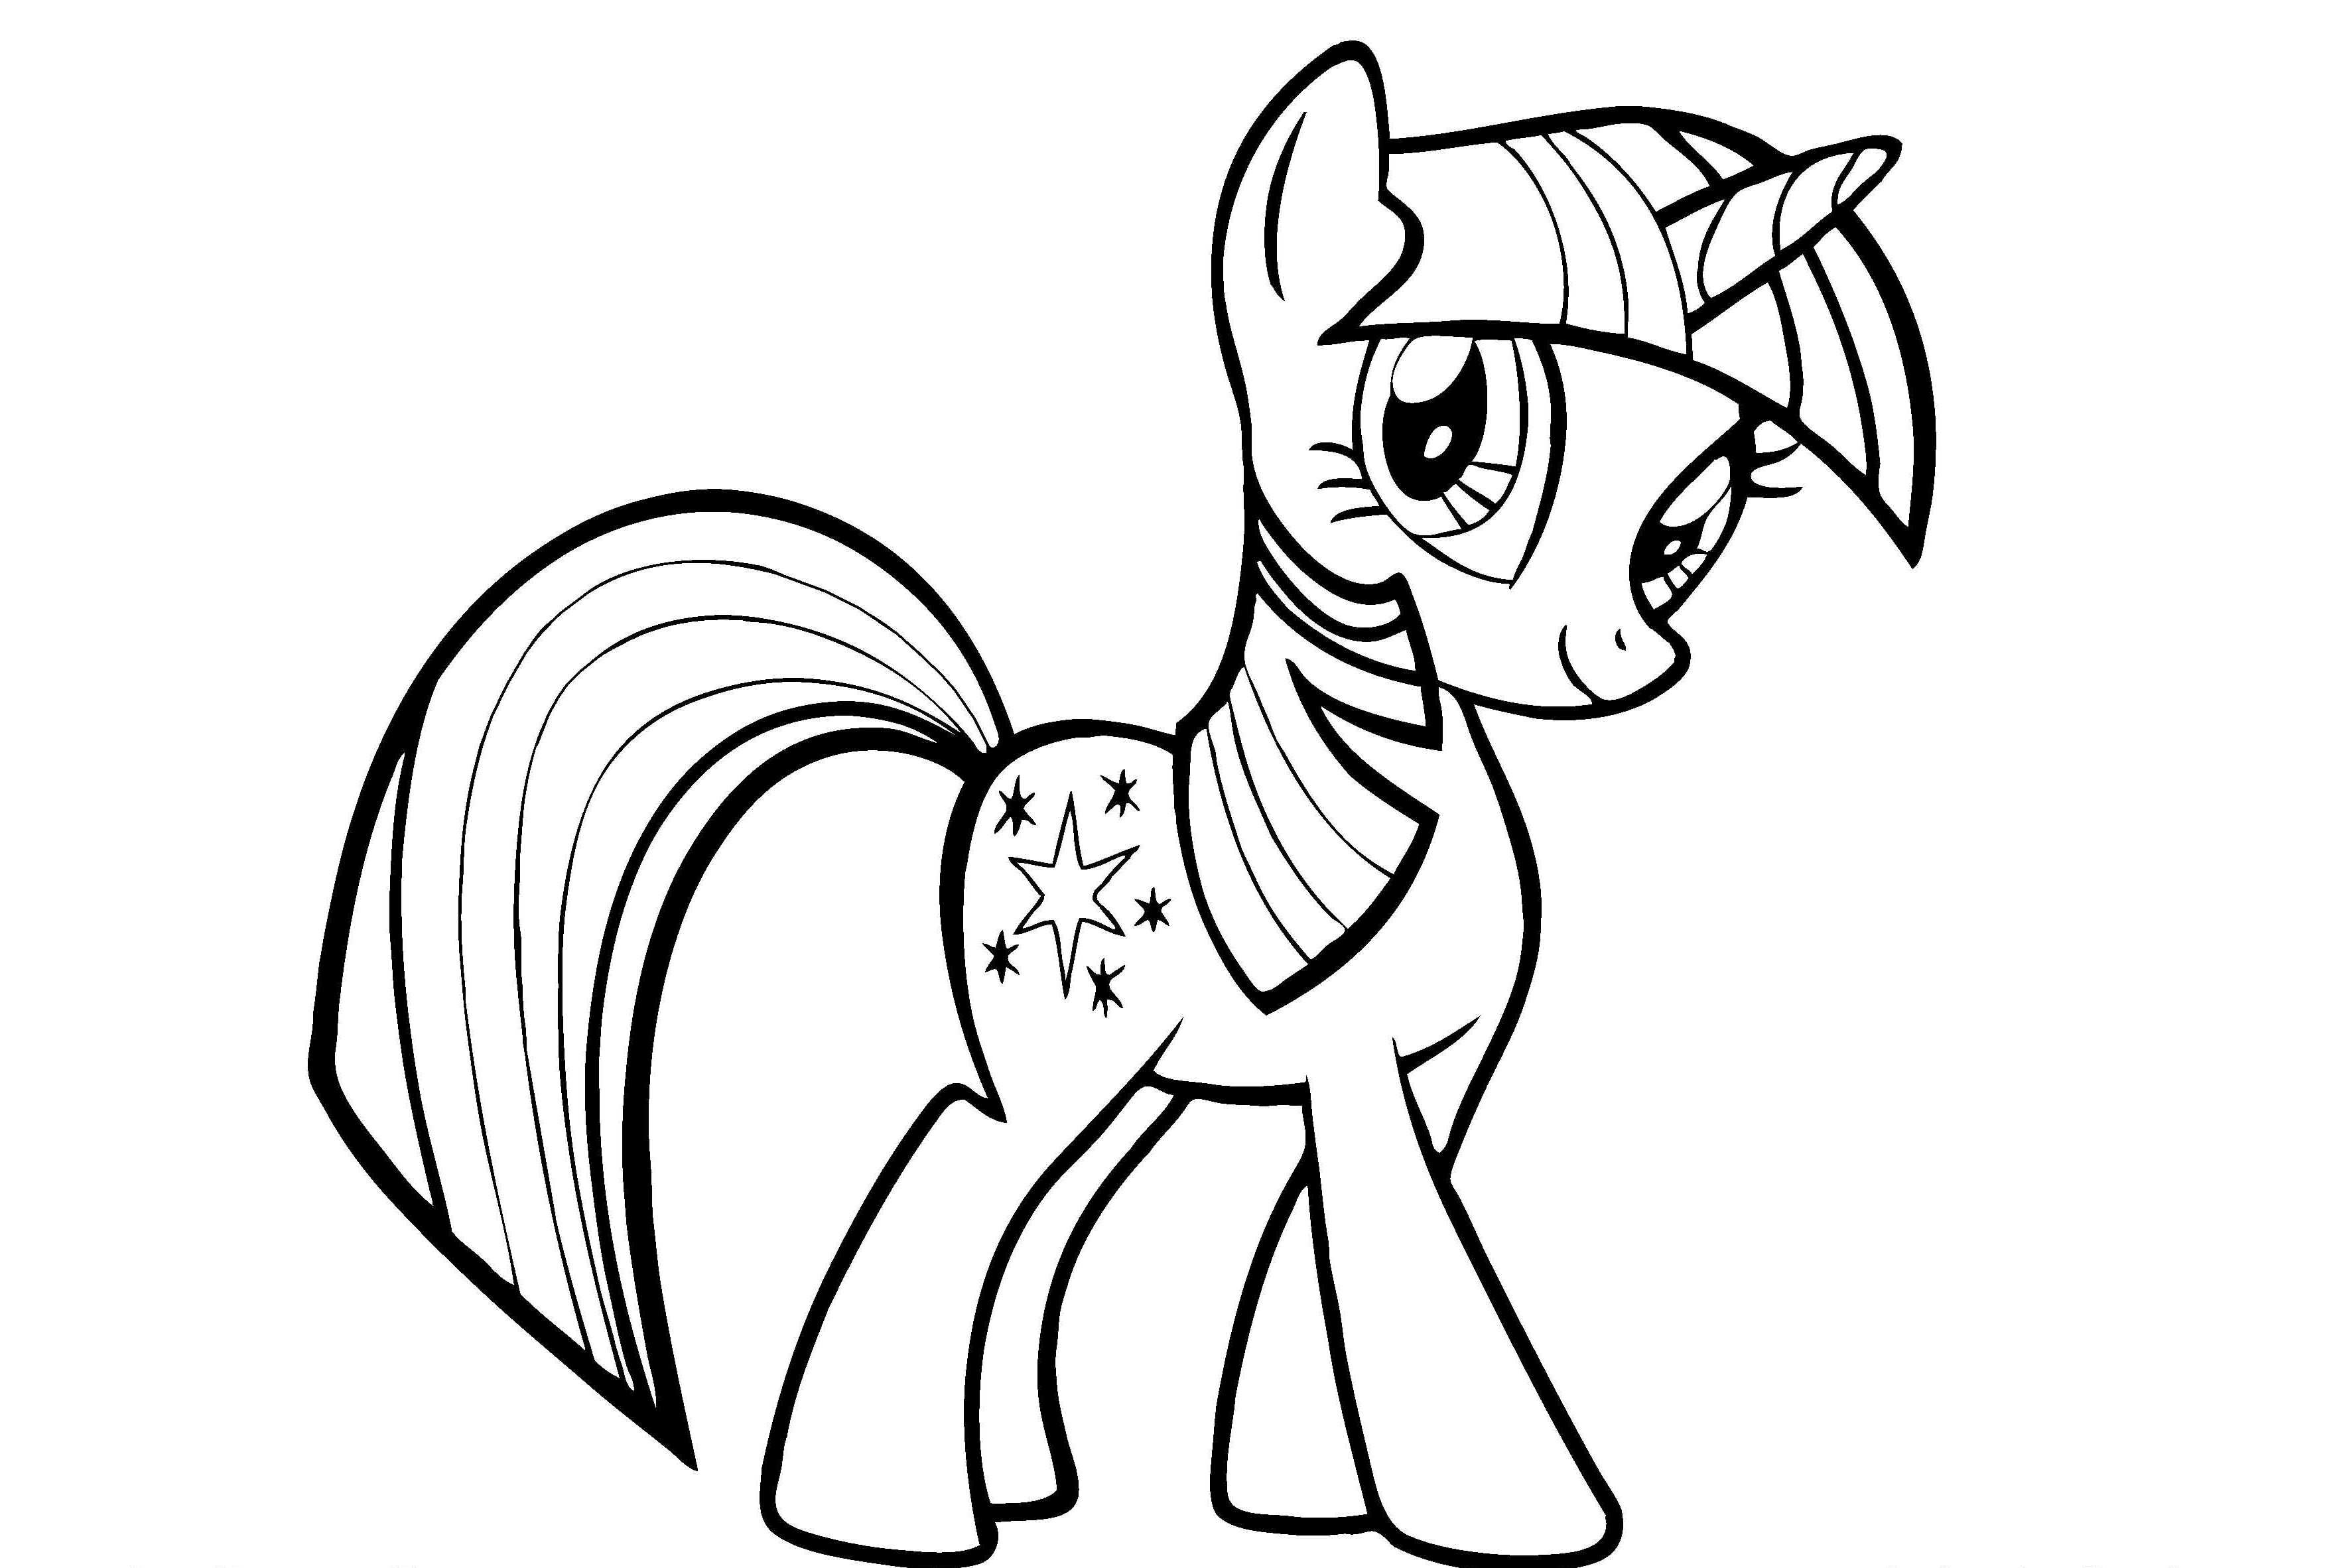 Blank My Little Pony Coloring Pages at GetDrawings Free download